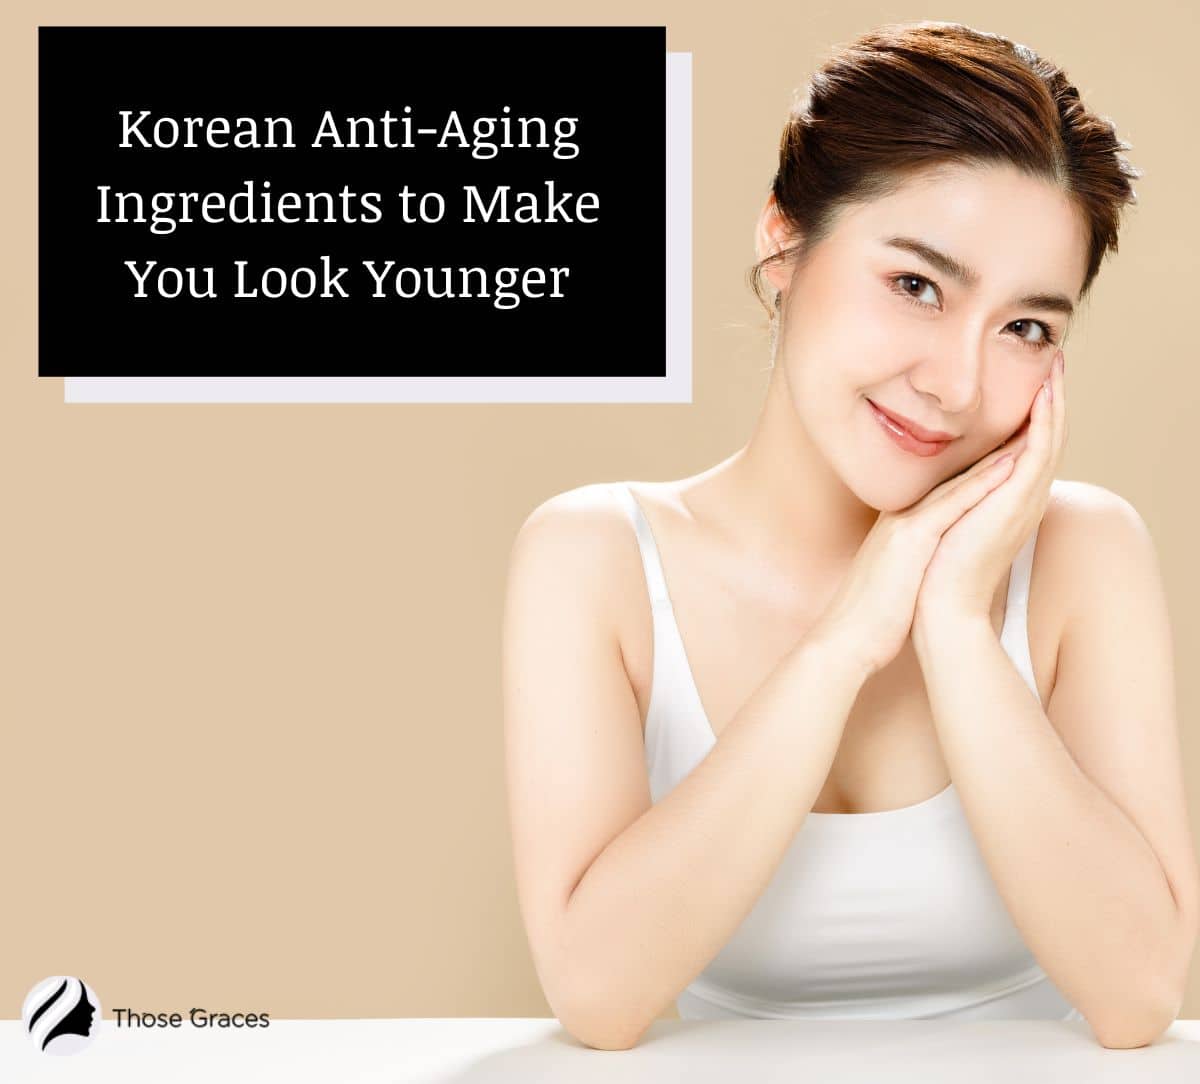 beautiful lady with flawless skin achieved by using korean anti aging ingredients